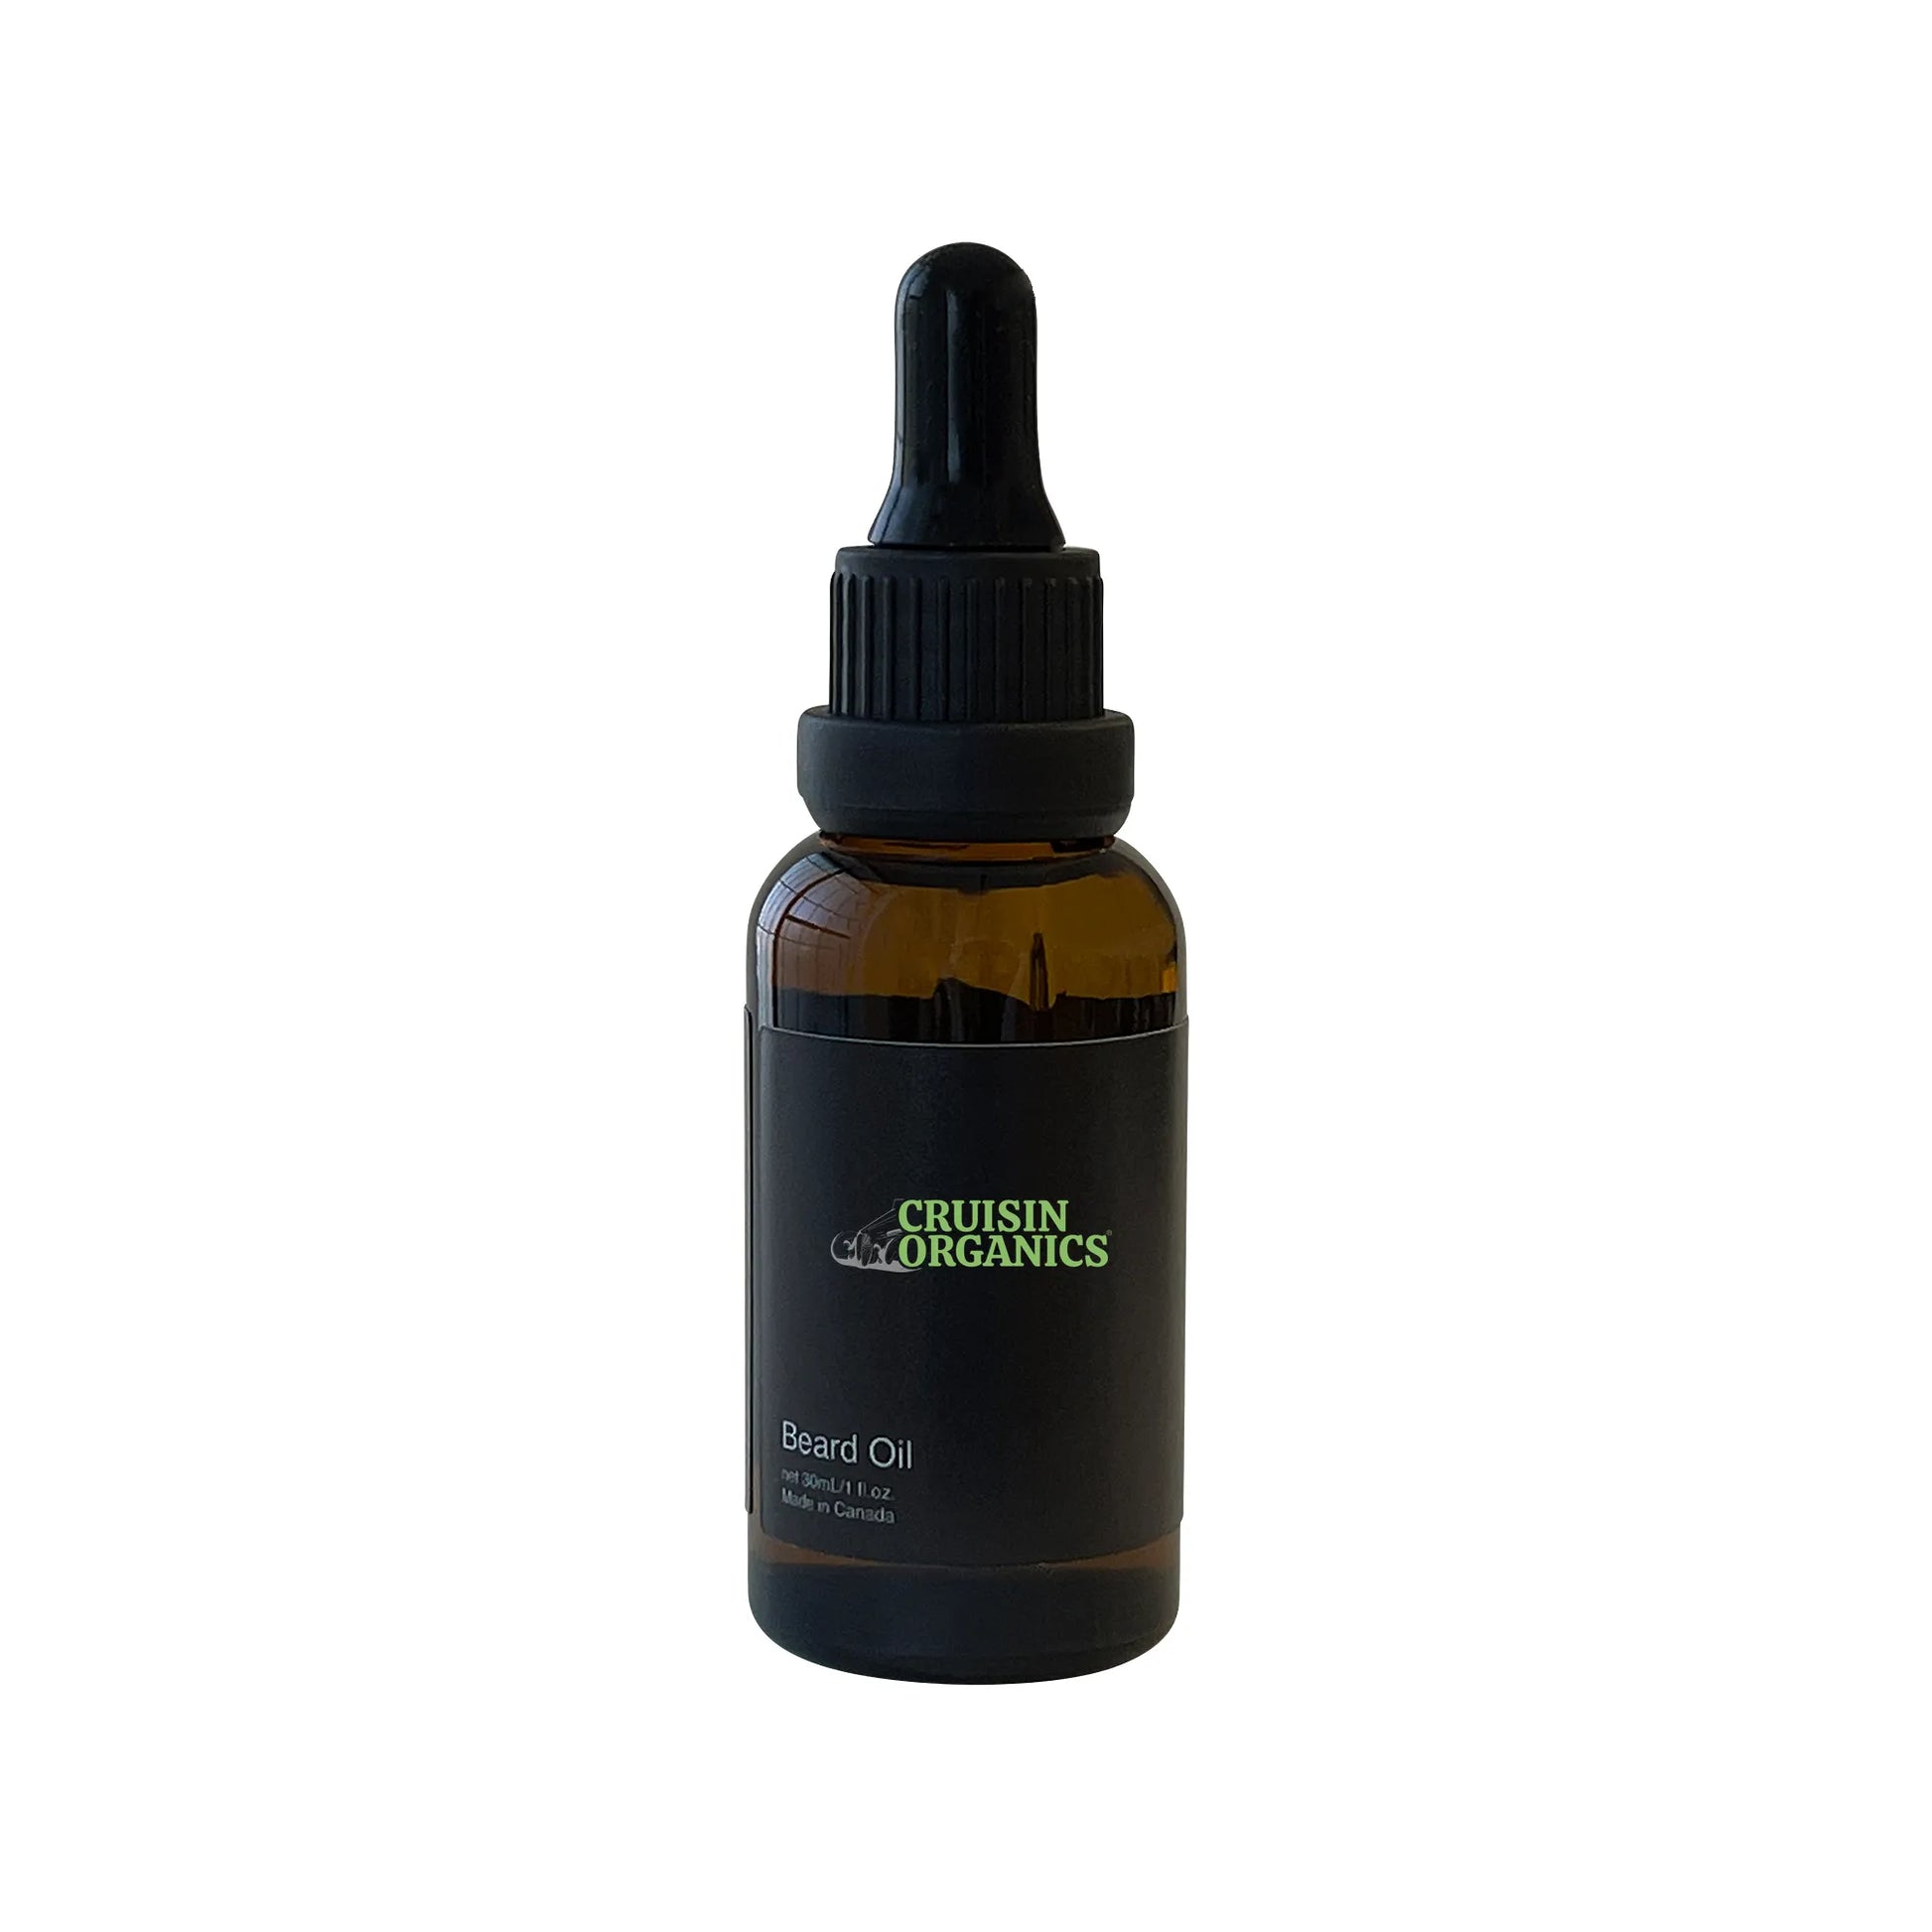 "Keep your beard hydrated and smelling fresh all day with our premium all-natural Beard Growth Beard Oil. Formulated with grapeseed oil, argan oil, jojoba oil, and rosemary essential oil, this product promotes healthy growth and reduces itching."